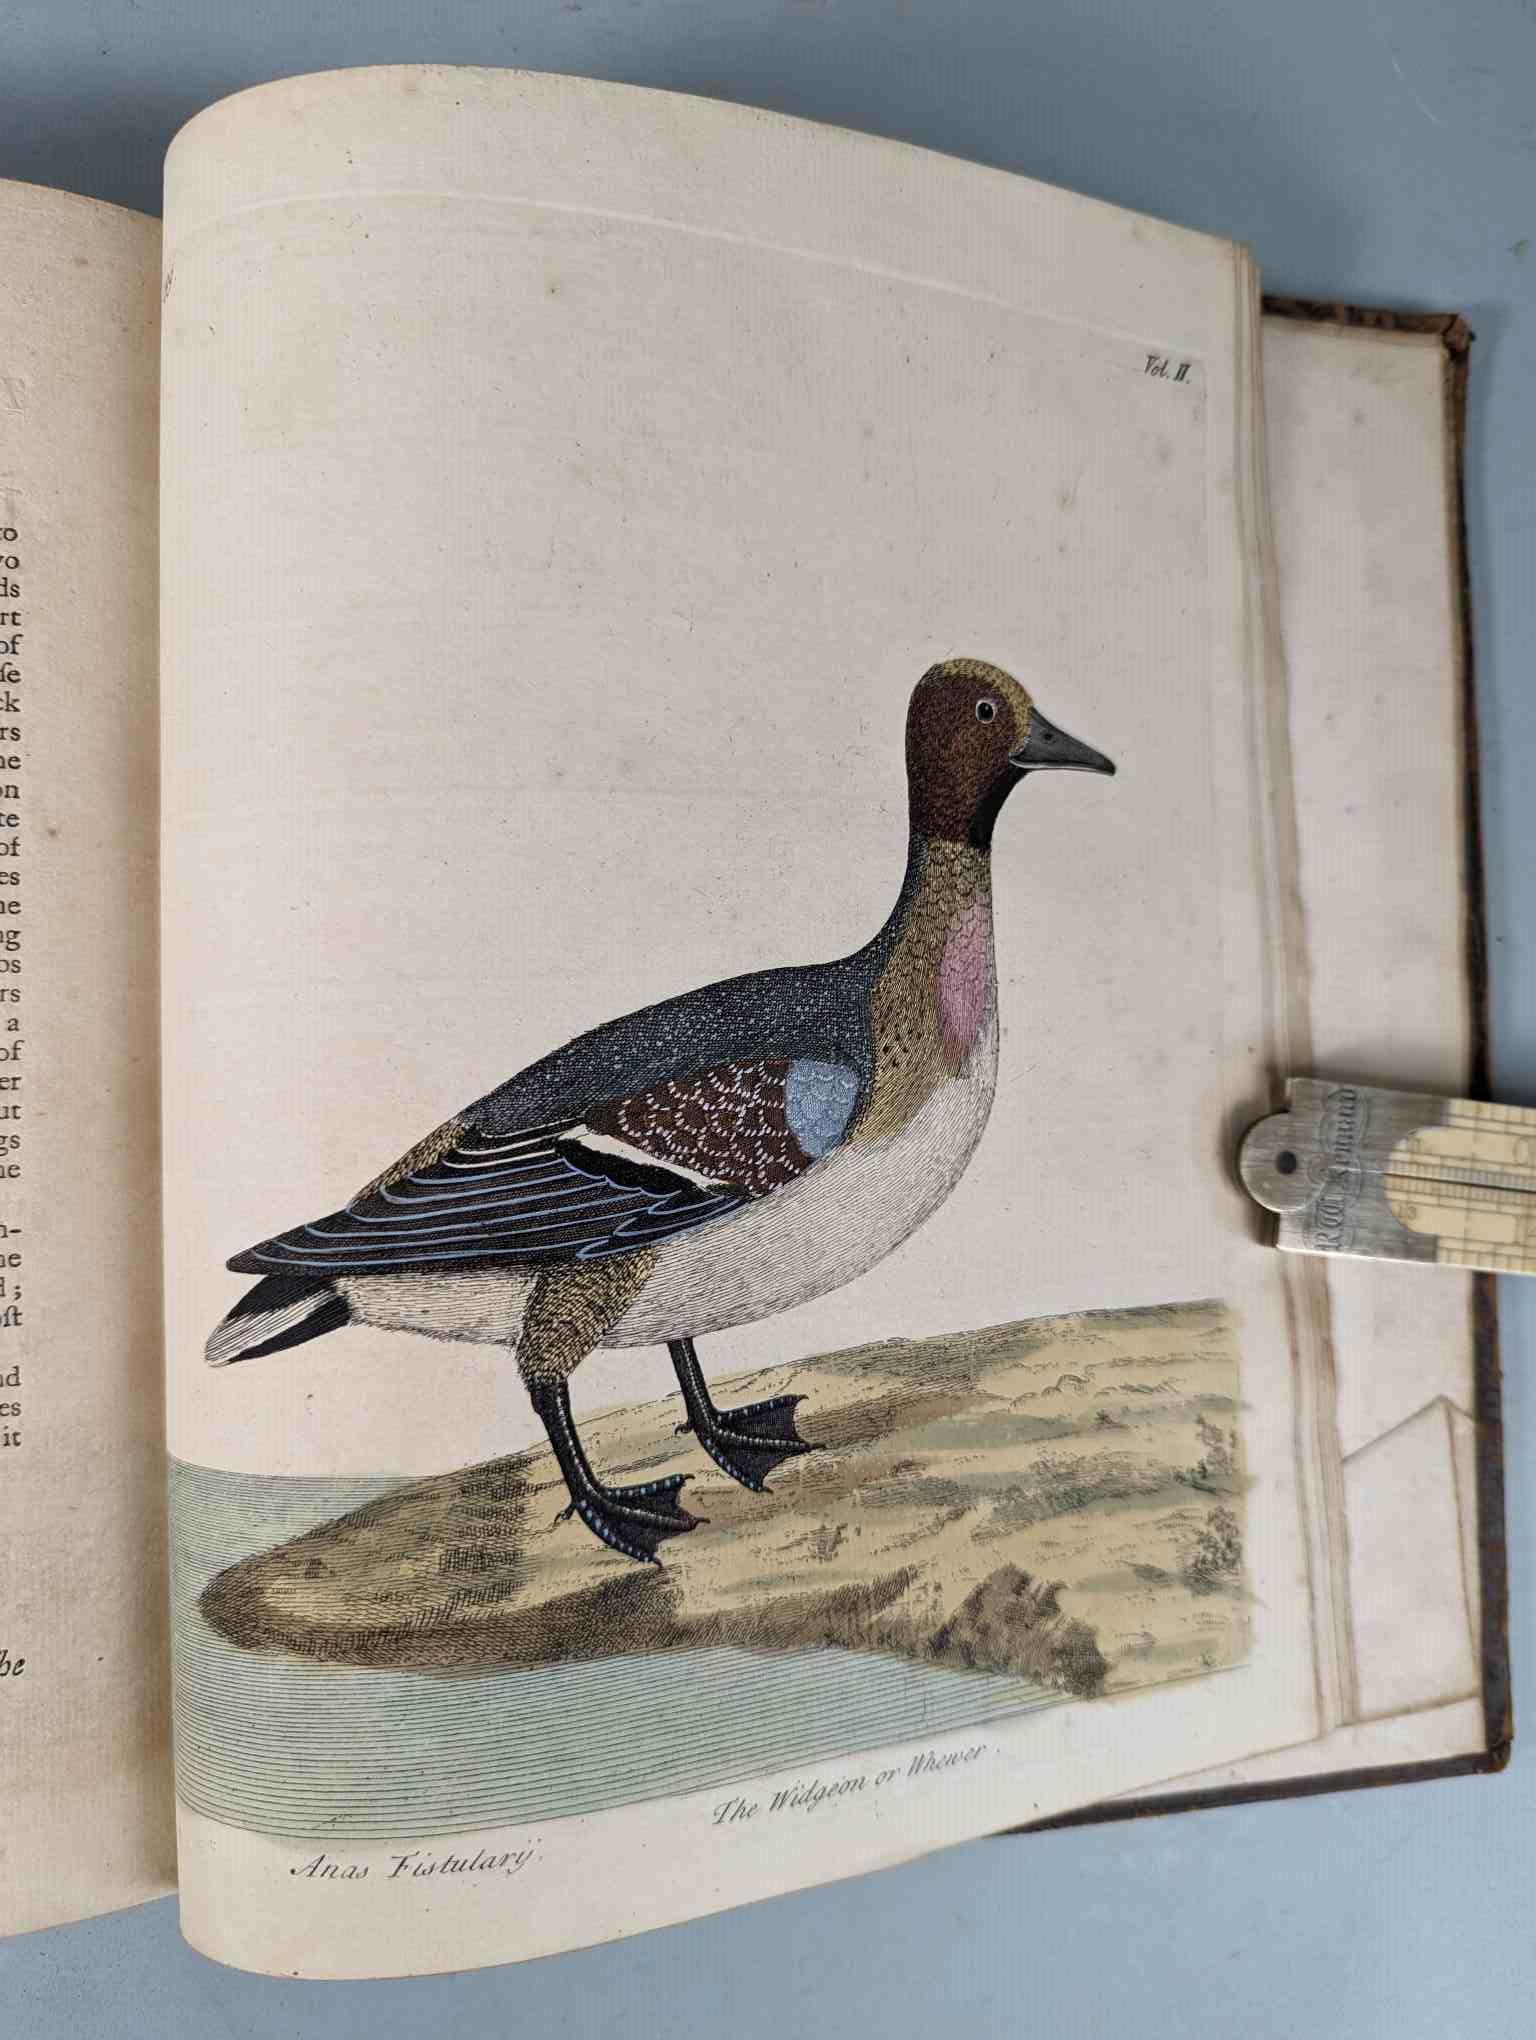 ALBIN, Eleazar. A Natural History of Birds, to which are added, Notes and Observations by W. - Image 203 of 208